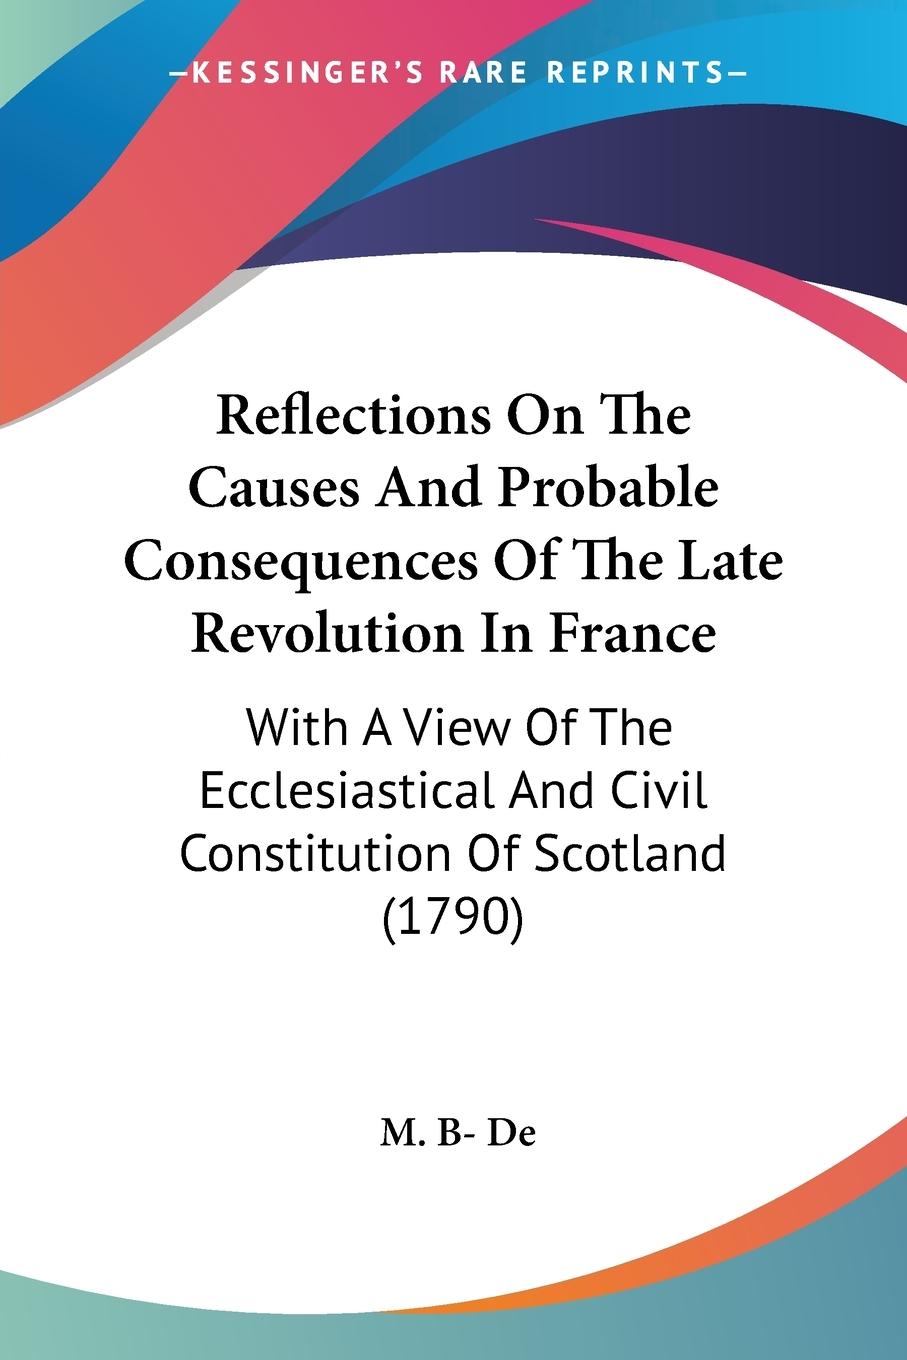 Reflections On The Causes And Probable Consequences Of The Late Revolution In France - B- De, M.